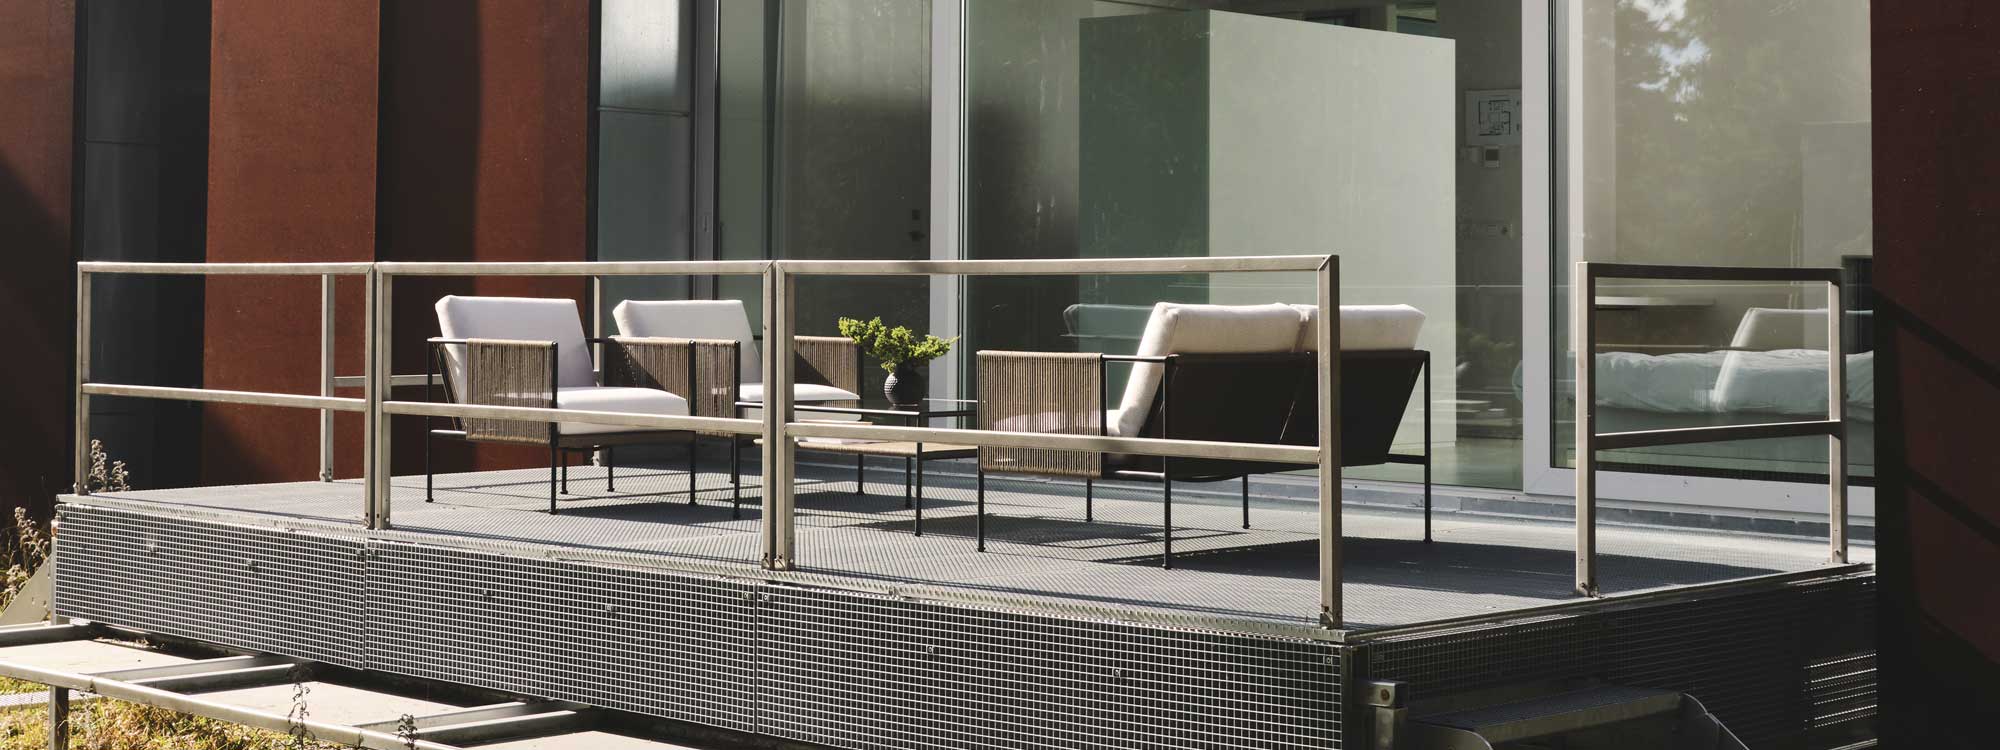 Image of Roshults Antibes outdoor lounge furniture on sunny terrace